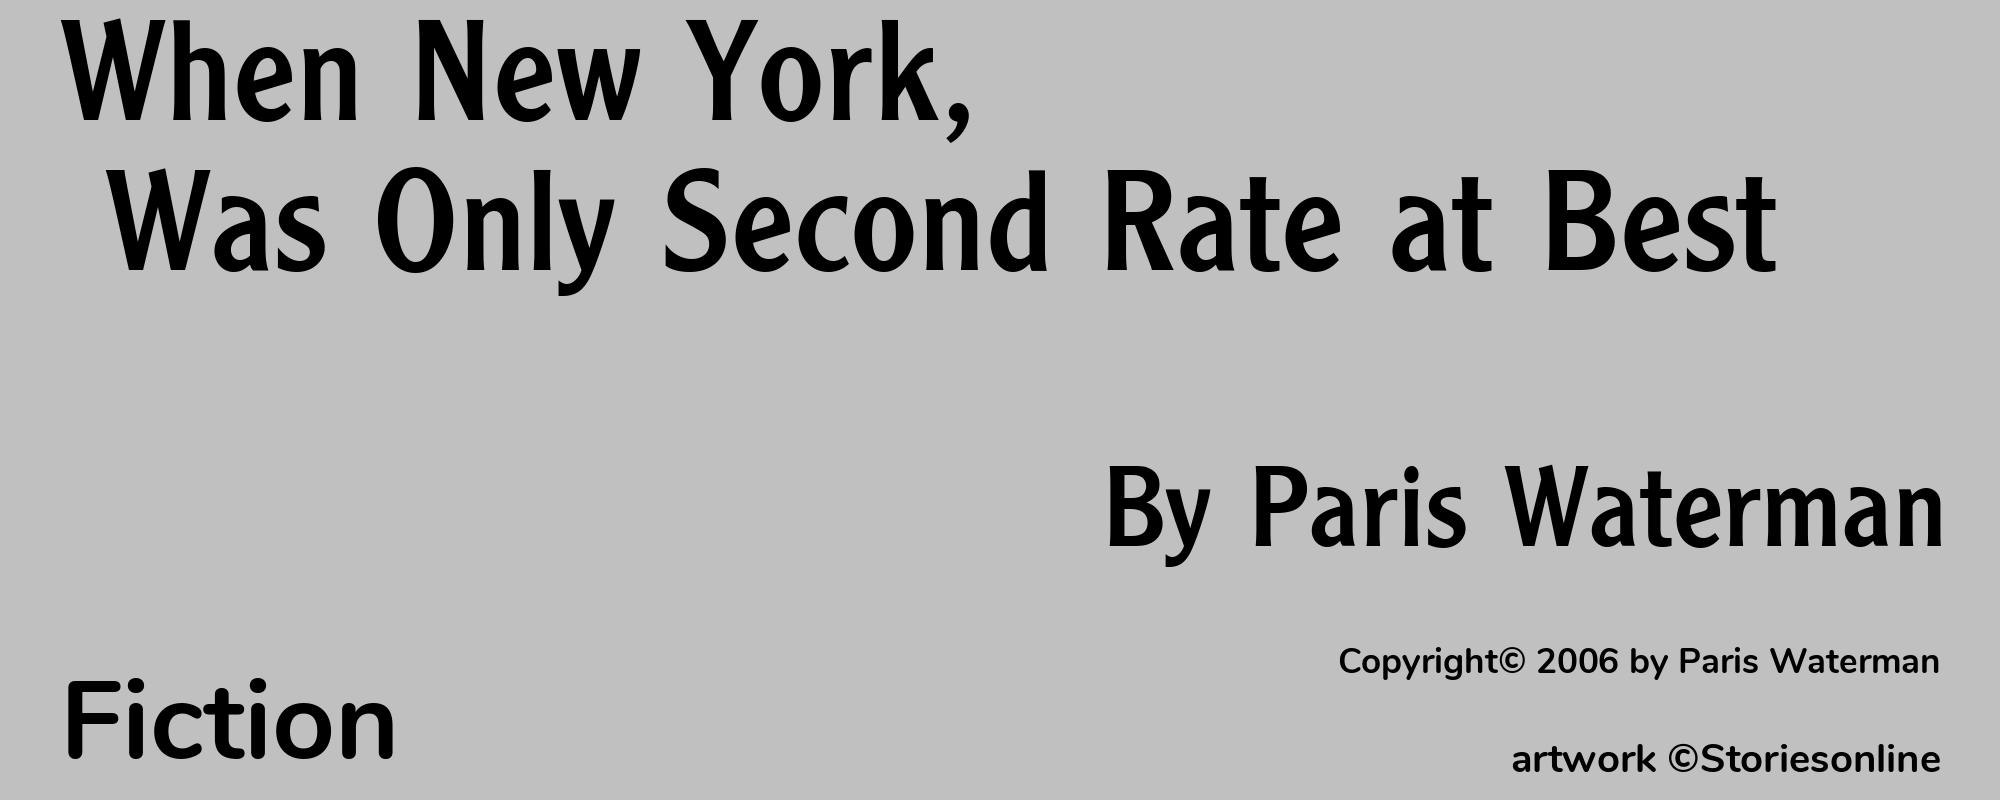 When New York, Was Only Second Rate at Best - Cover